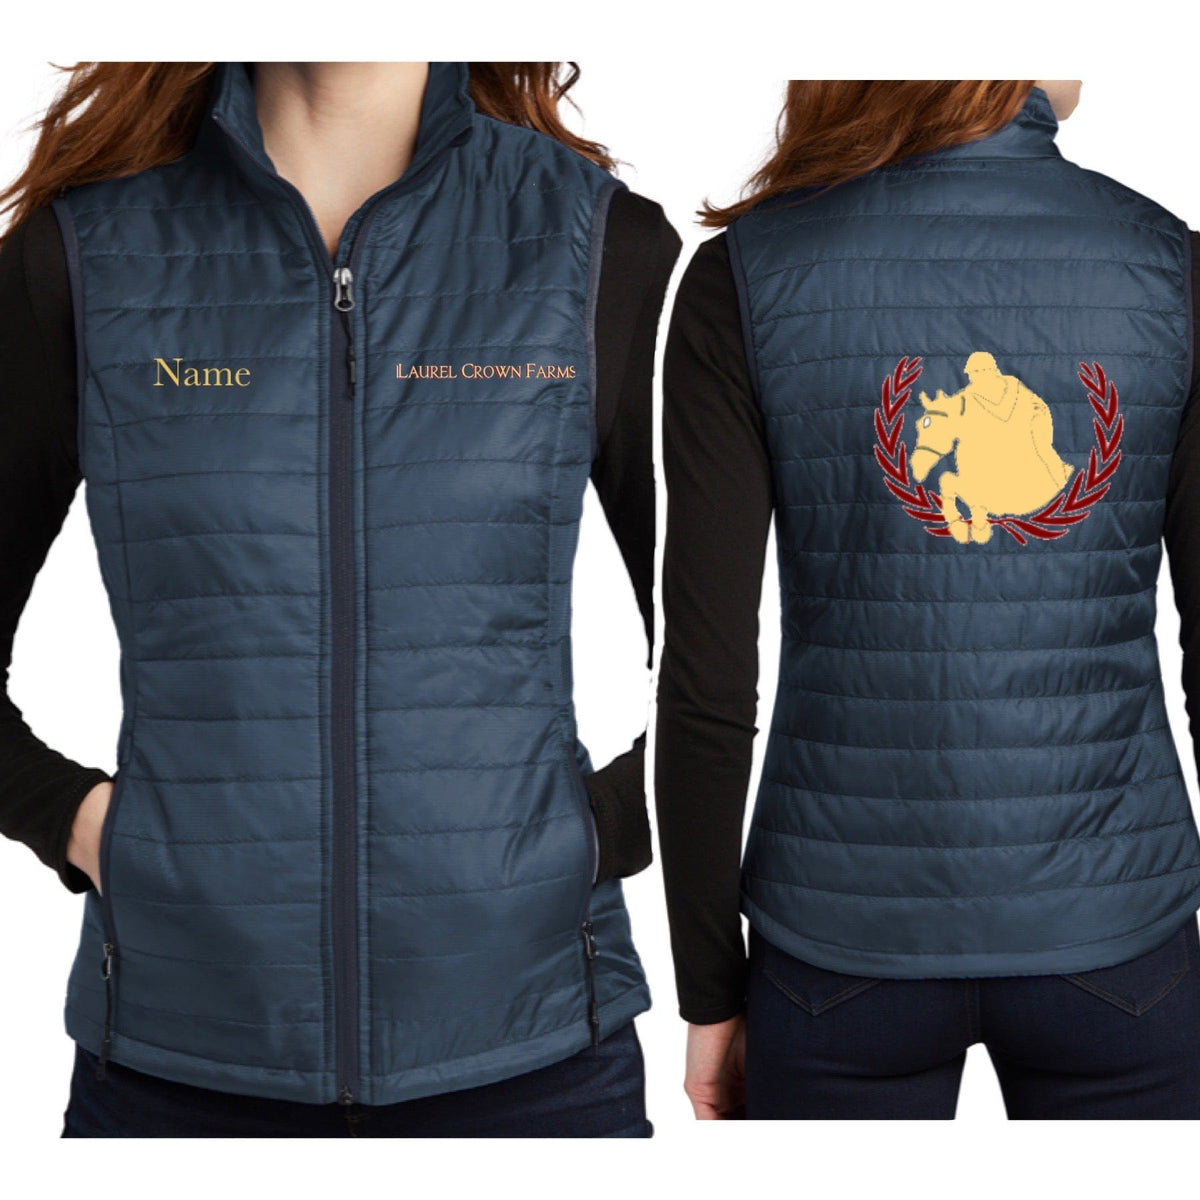 Equestrian Team Apparel Laurel Crown Farms Puffy Vest equestrian team apparel online tack store mobile tack store custom farm apparel custom show stable clothing equestrian lifestyle horse show clothing riding clothes horses equestrian tack store